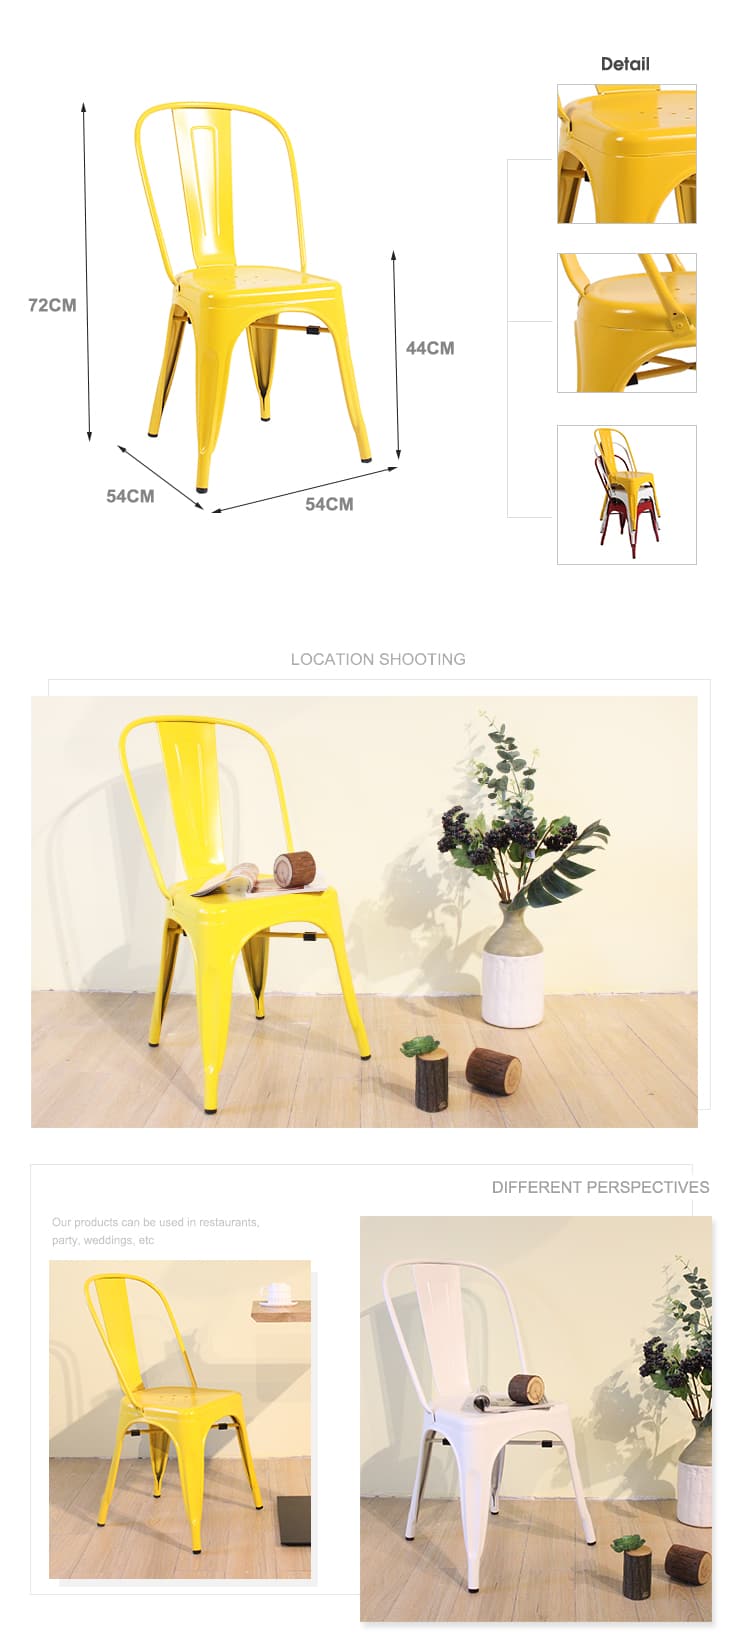 Tolix chair is an icon of furniture design with the eyecatching yellow tolix stool